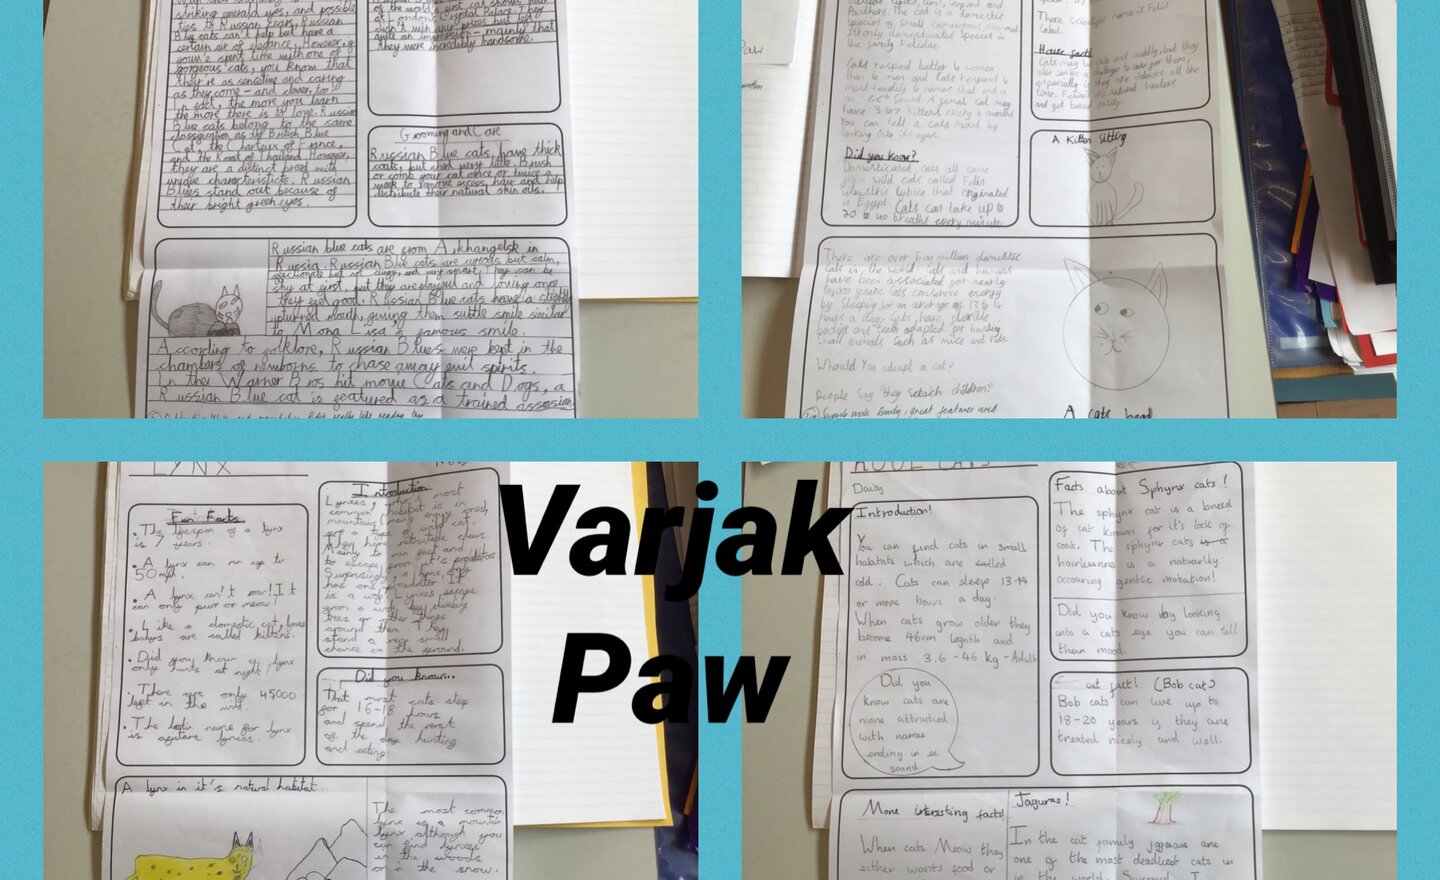 Image of Varjak Paw - Types of cats